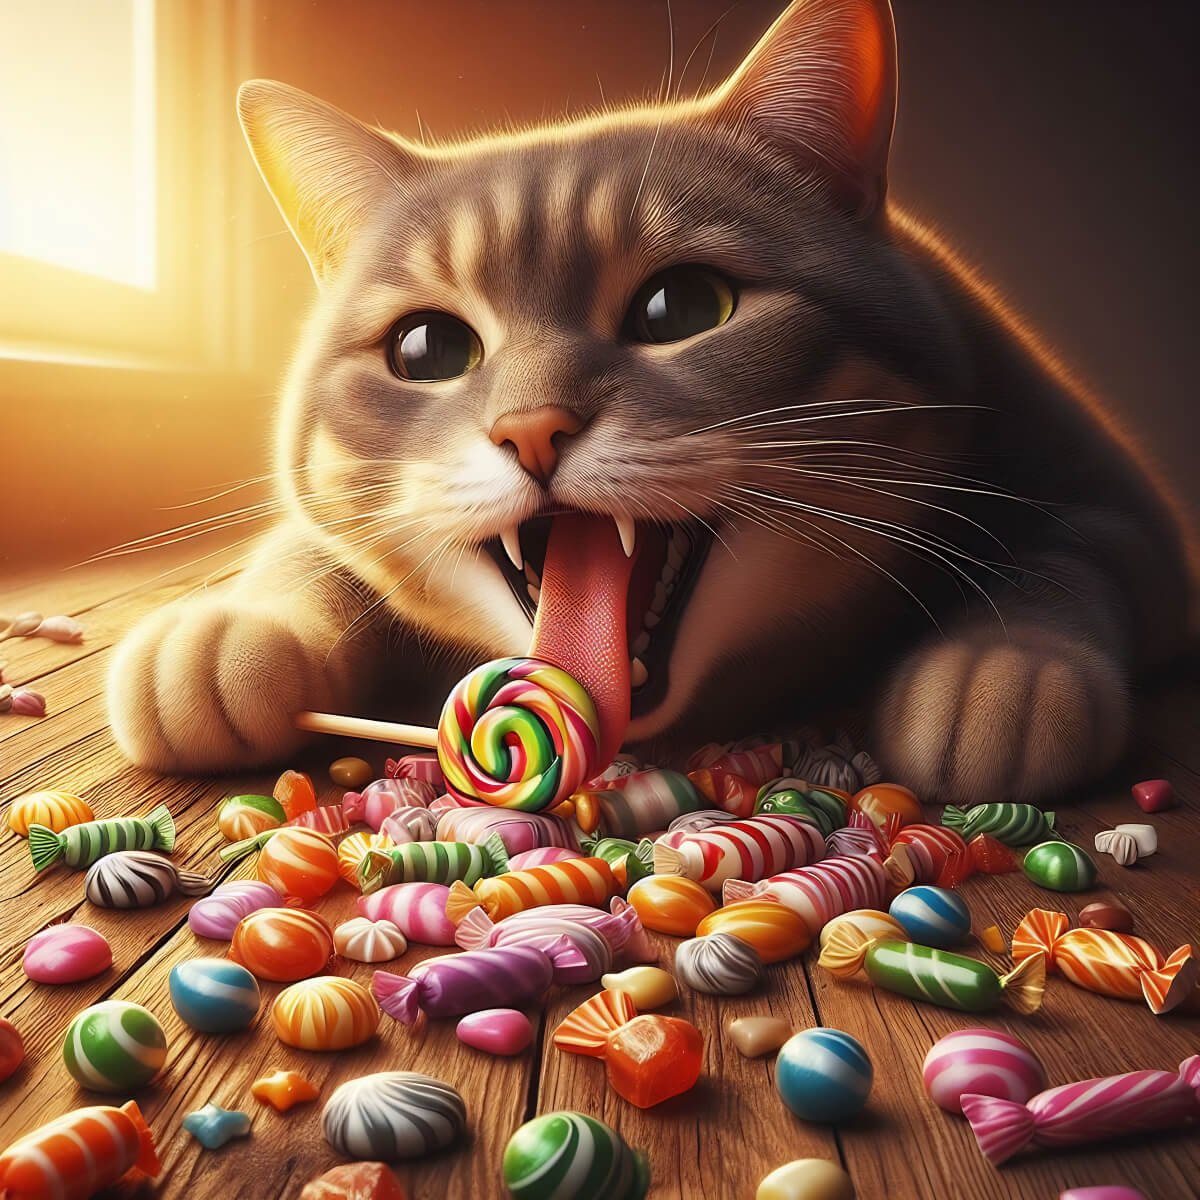 Illuustration of a cat eating sweets (candy) and a lollipop 